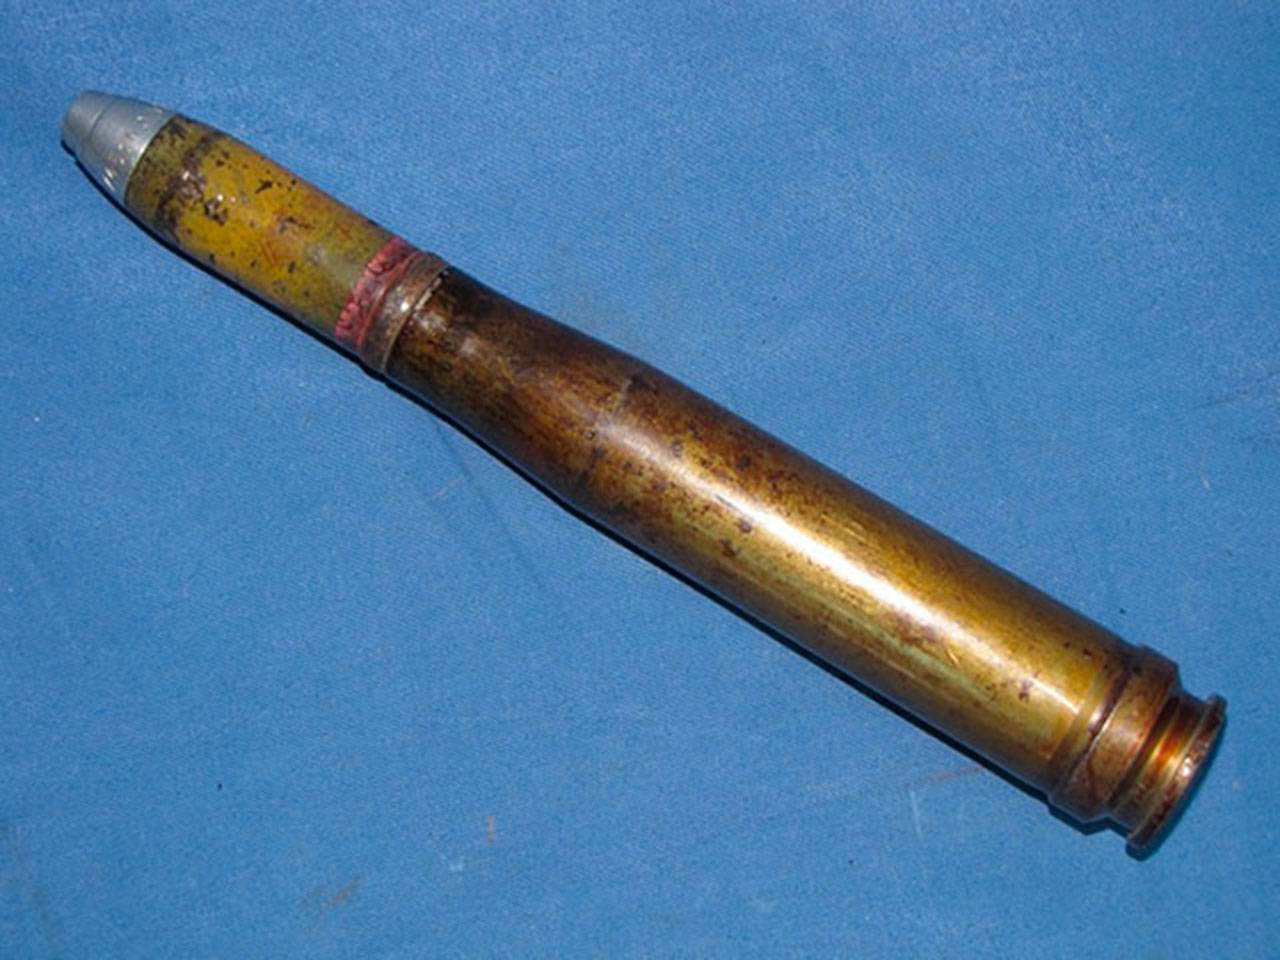 Unexploded ammunition, similar to this, has been found near Pacific Beach. (The Daily World file)